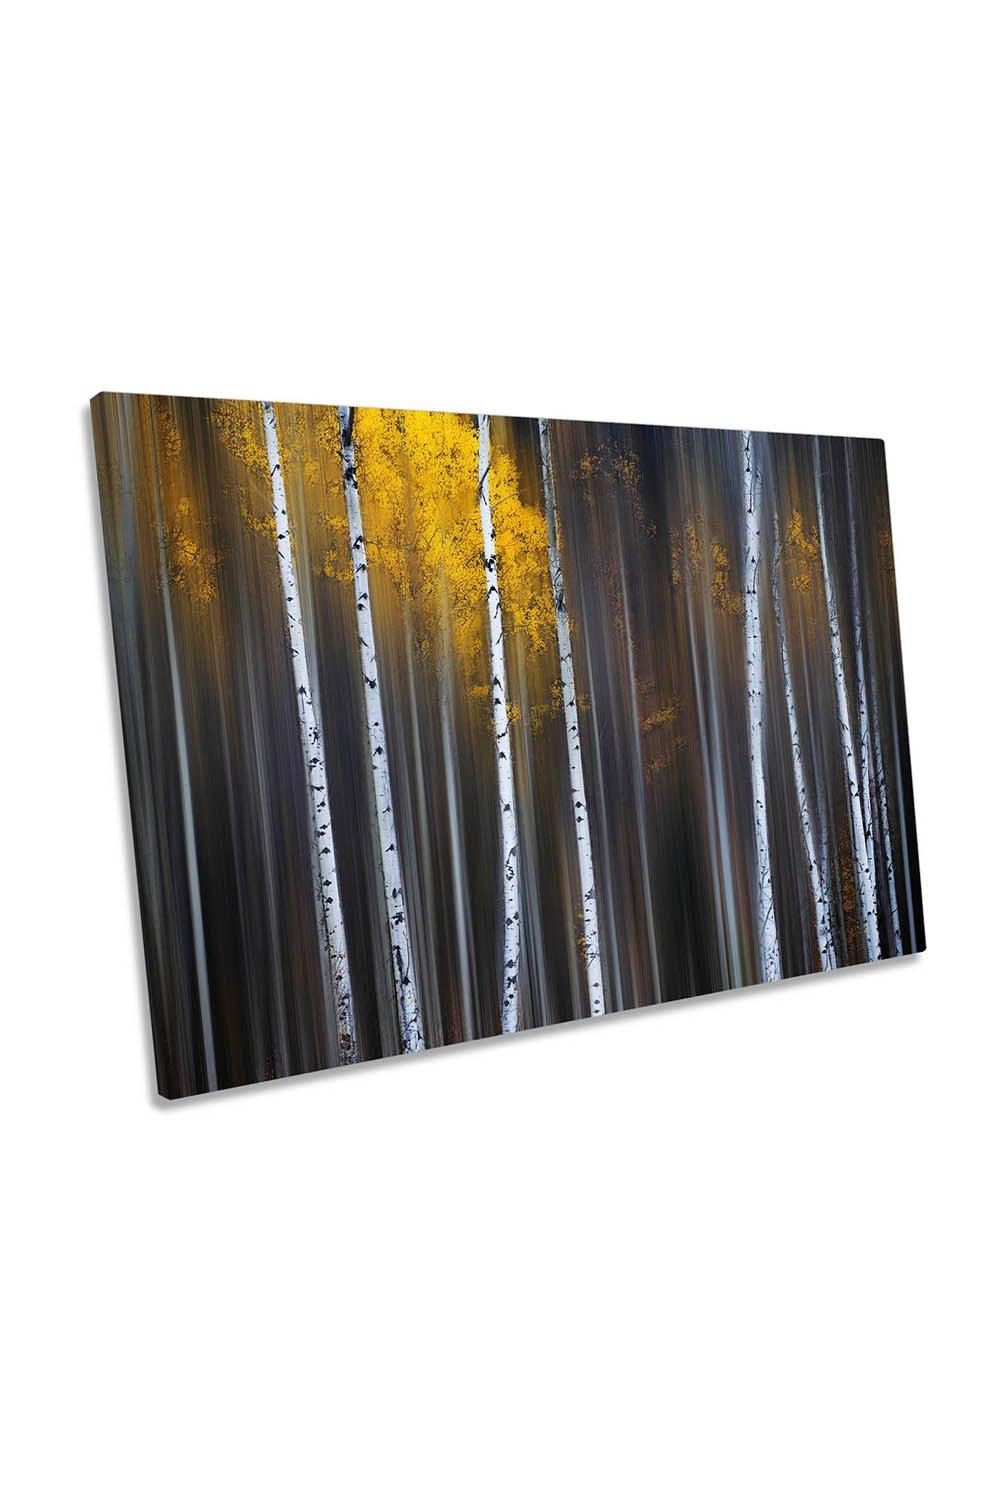 Curtain of Fall Forest Yellow Leaves Canvas Wall Art Picture Print